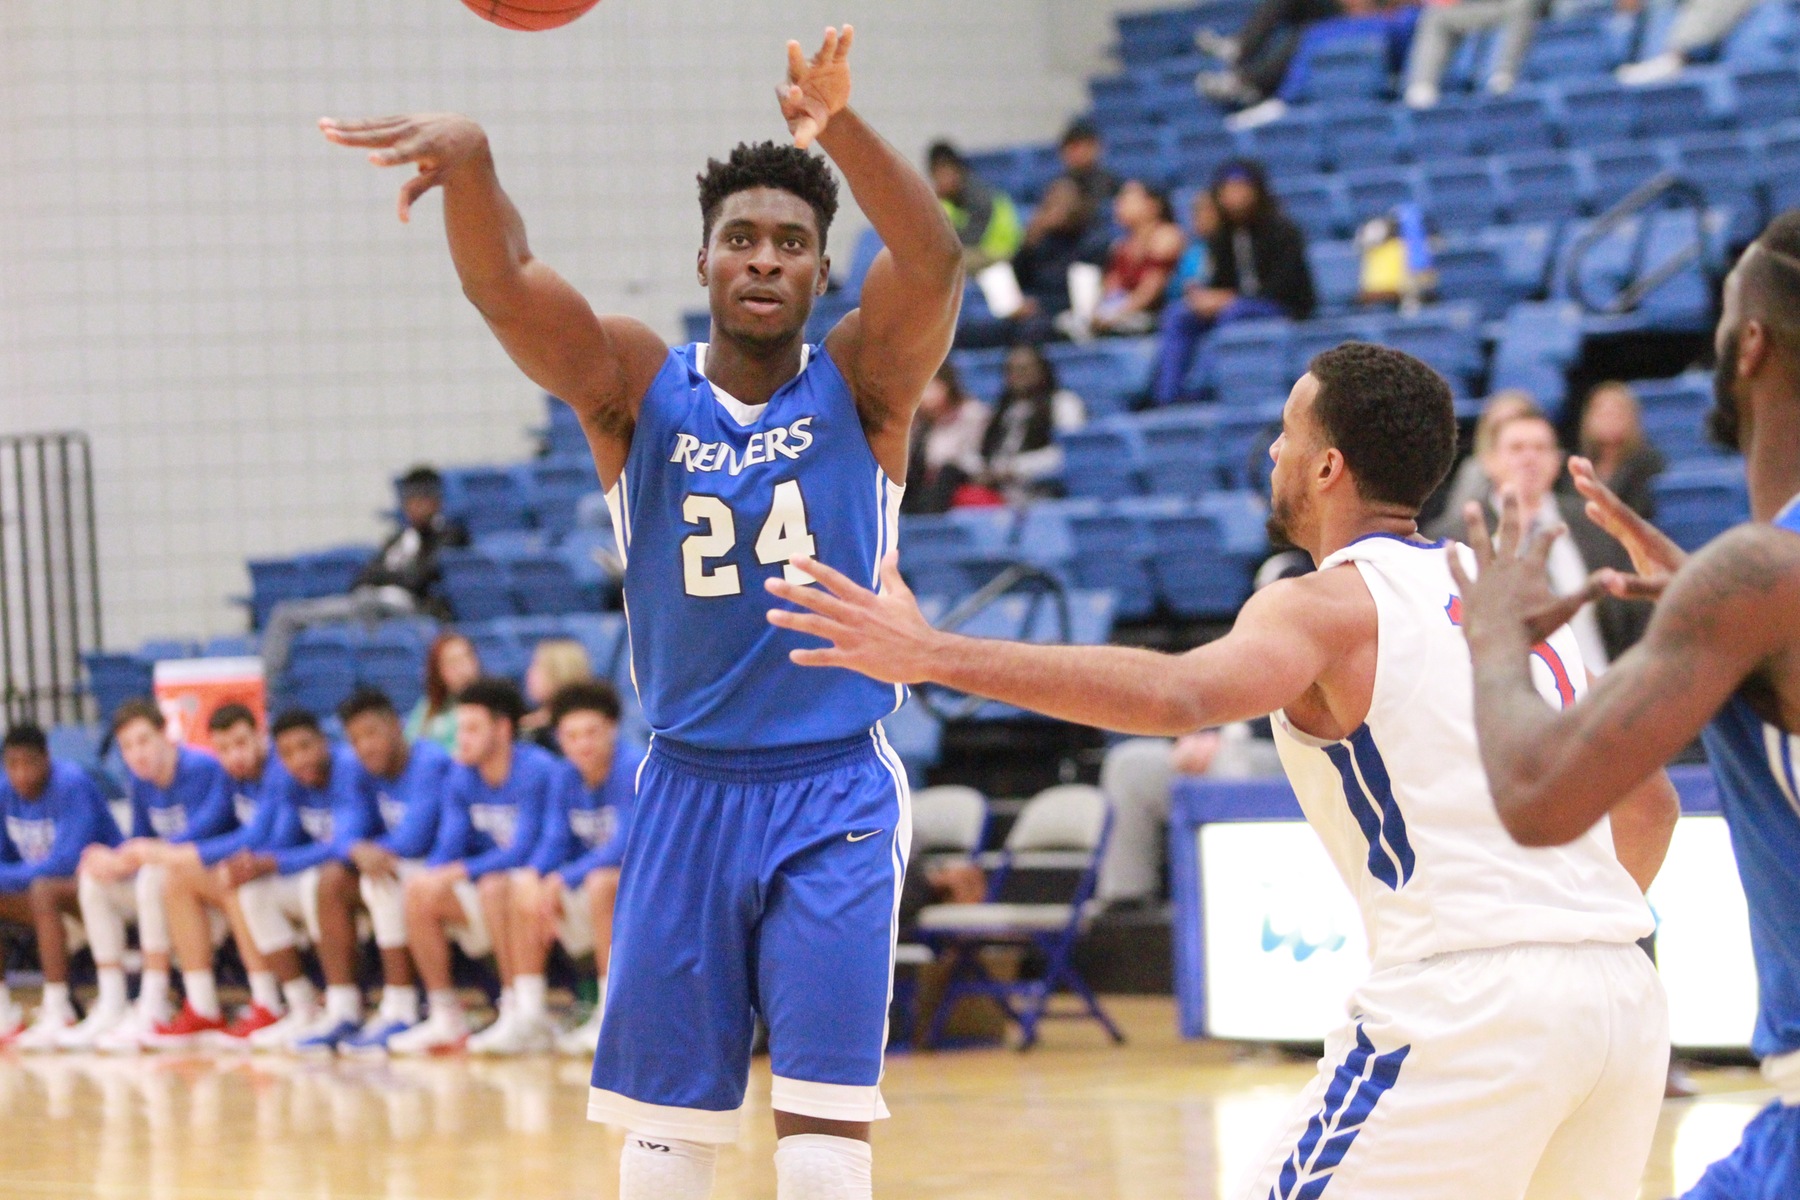 Emmanuel Ugboh scored 12 points, grabbed 8 rebounds, and blocked 6 shots in Iowa Western's road victory at Central (NE) Tuesday night.